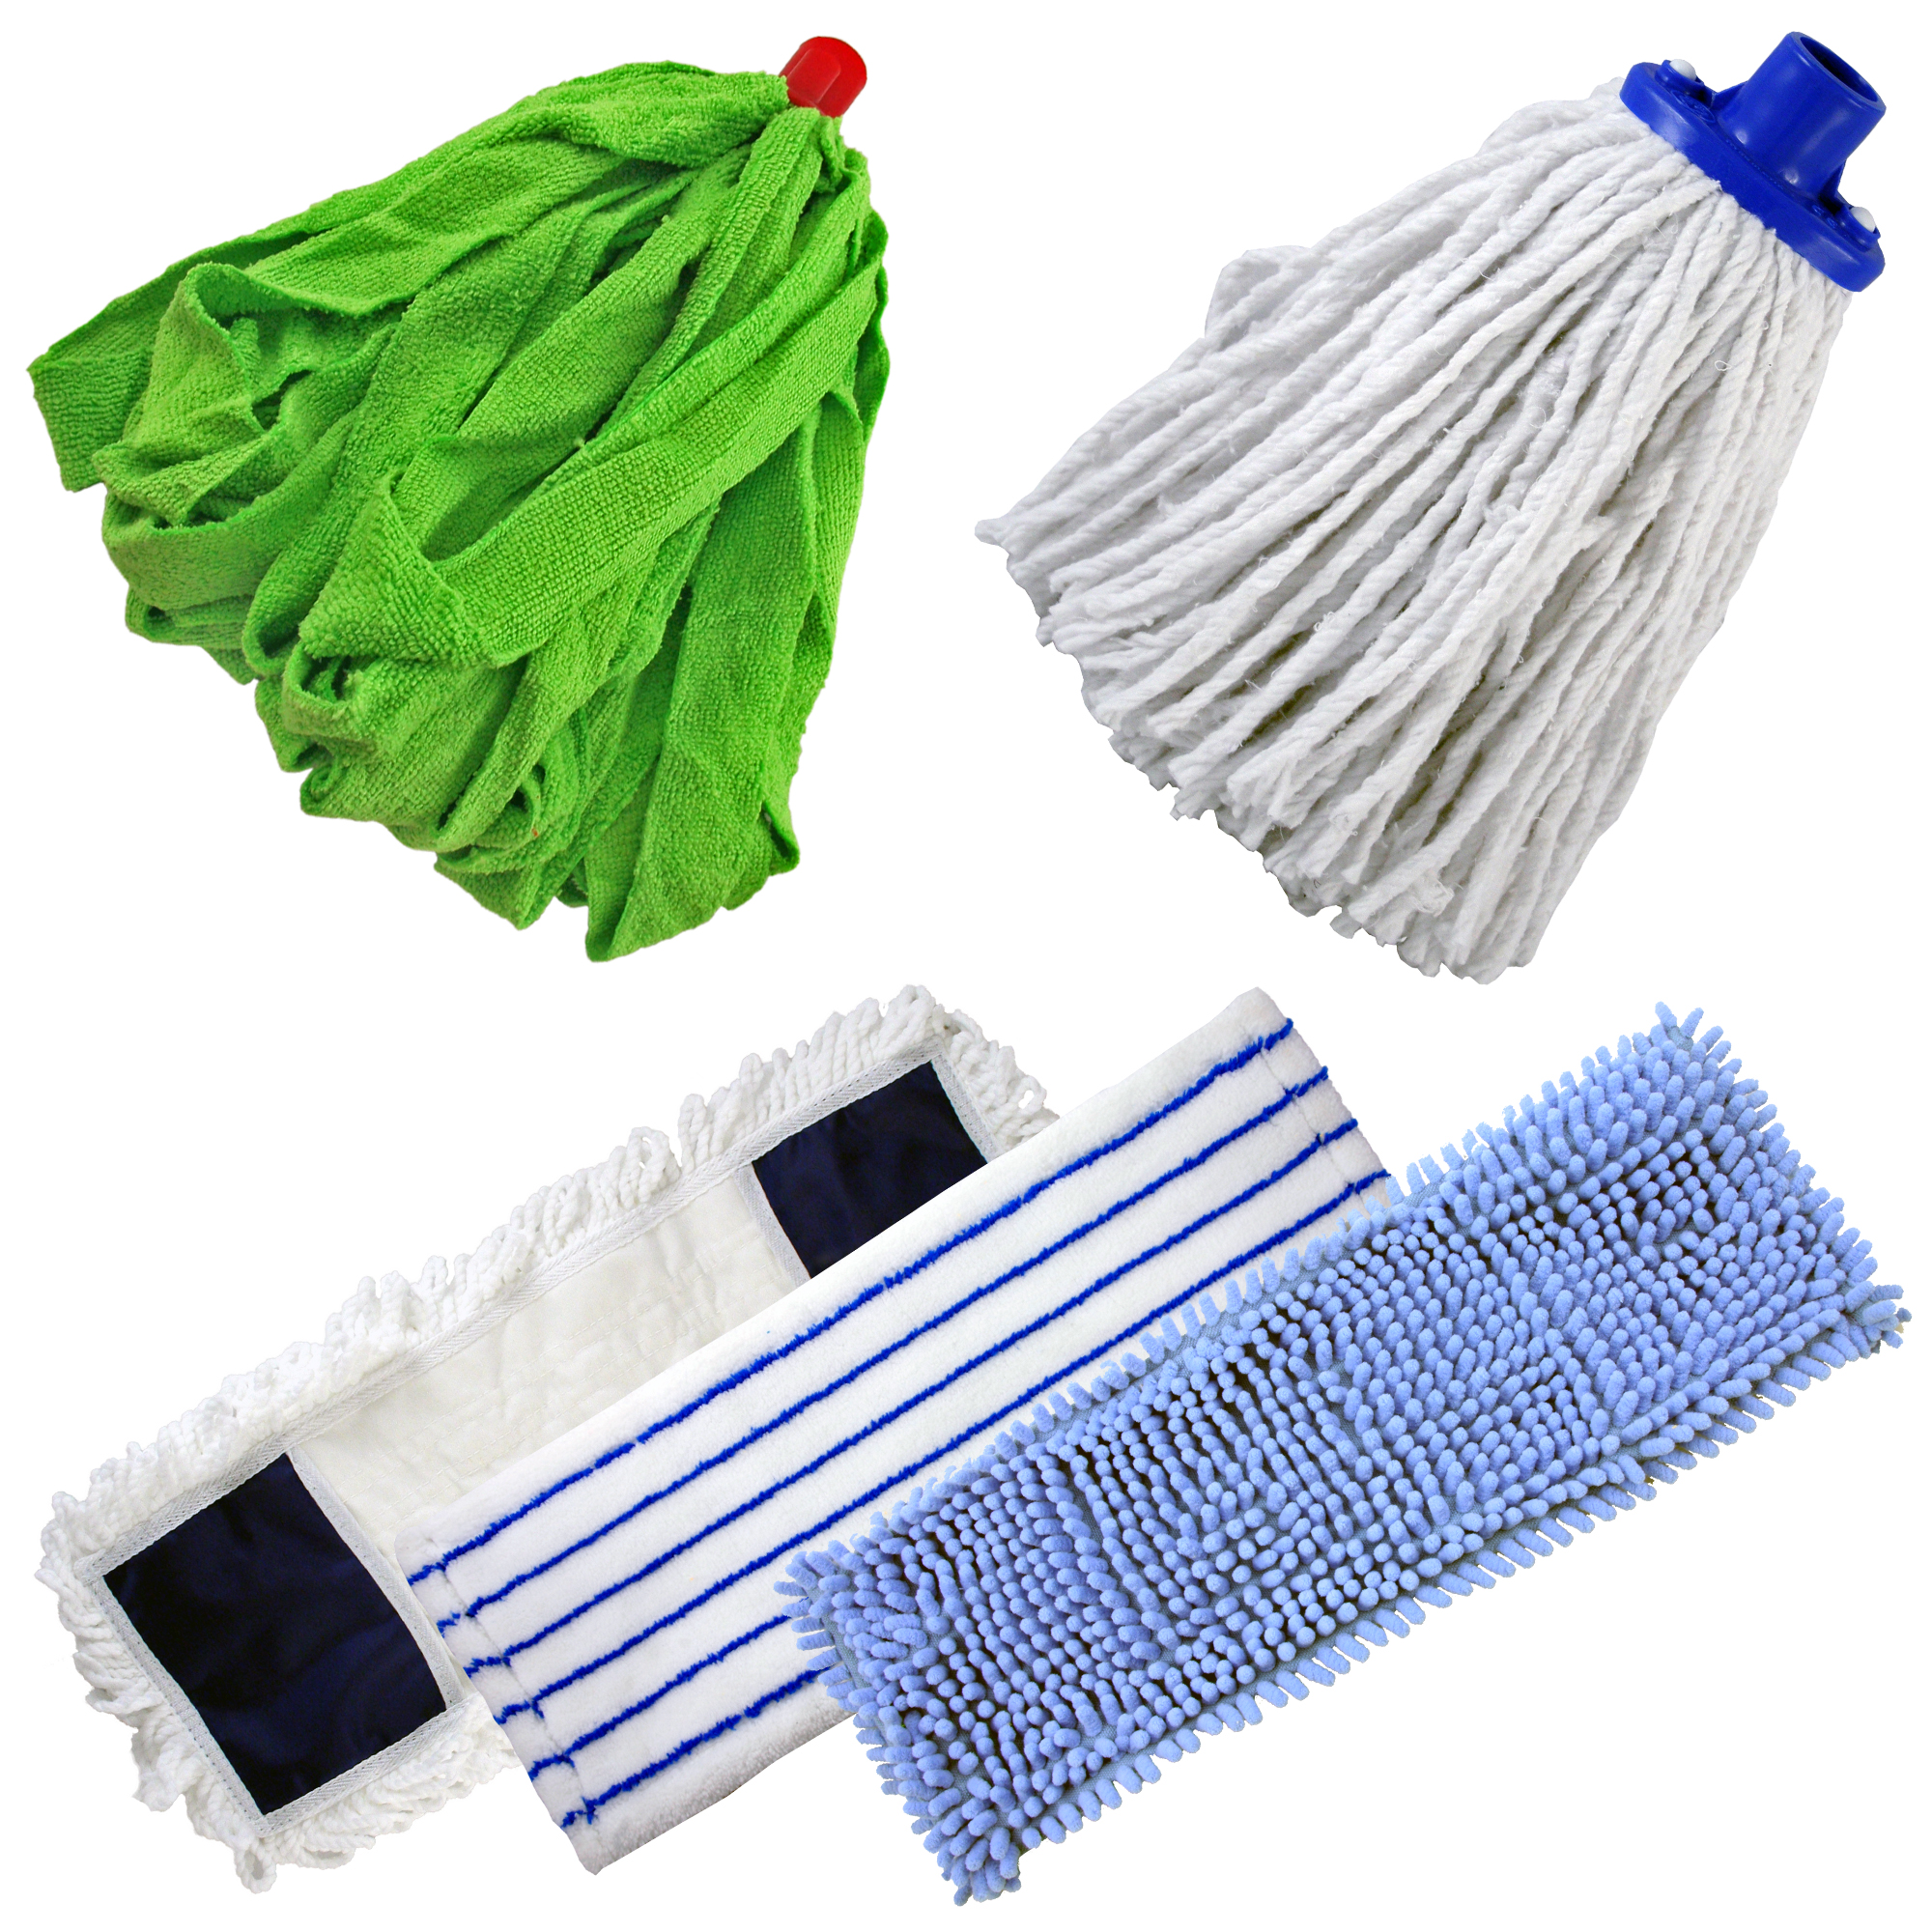 Cleaning and Housekeeping/BROOMS, MOPS, DUST PANS, BRUSHES/Mops